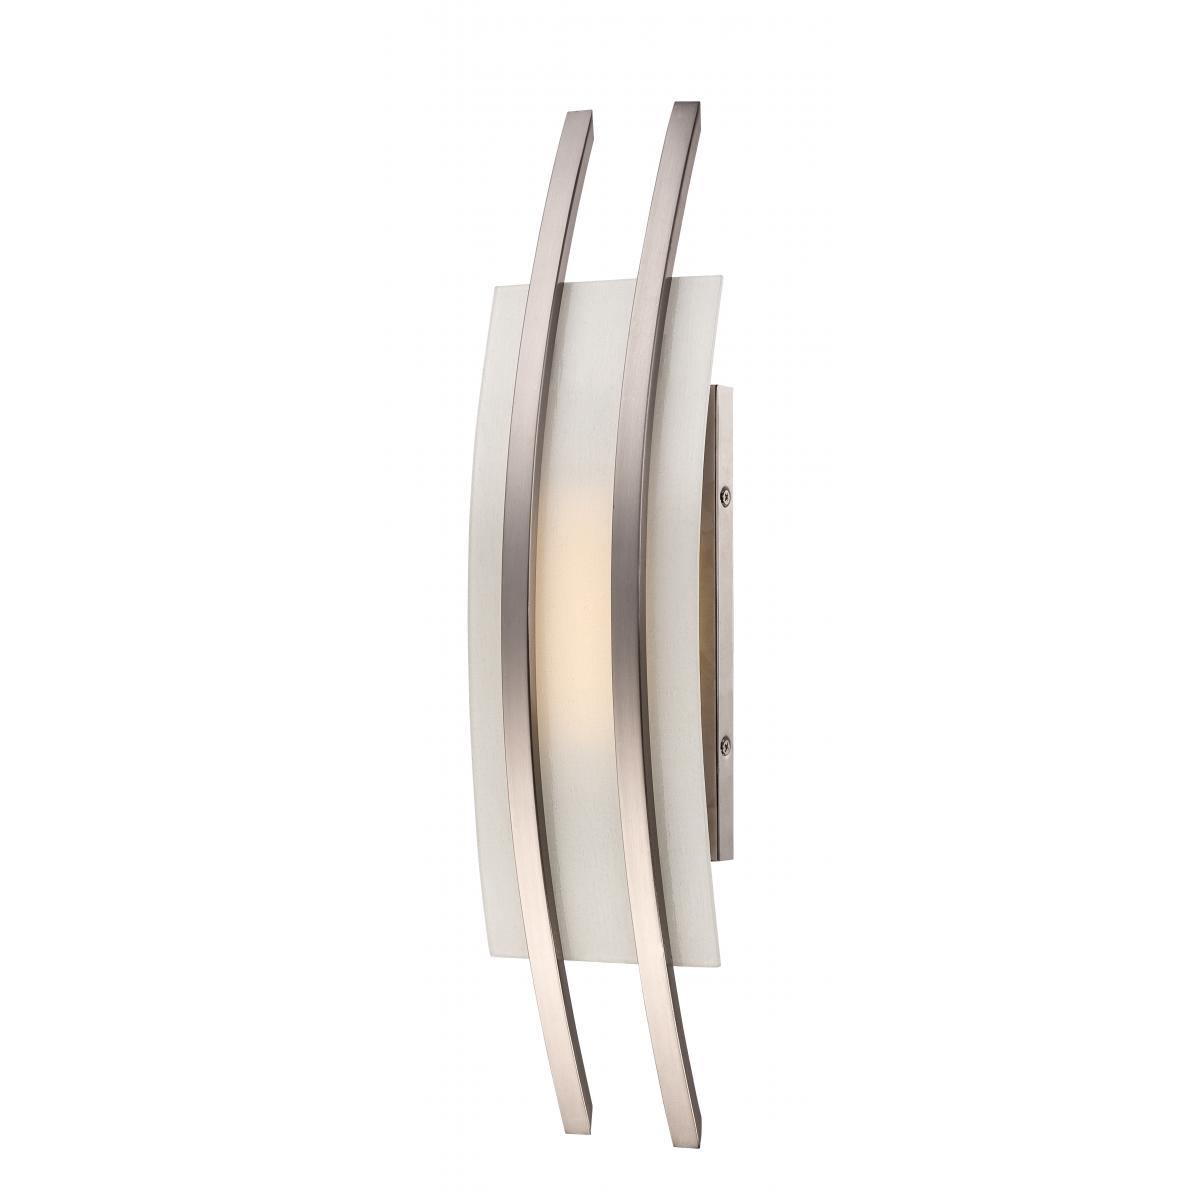 62-102 TRAX LED WALL SCONCE